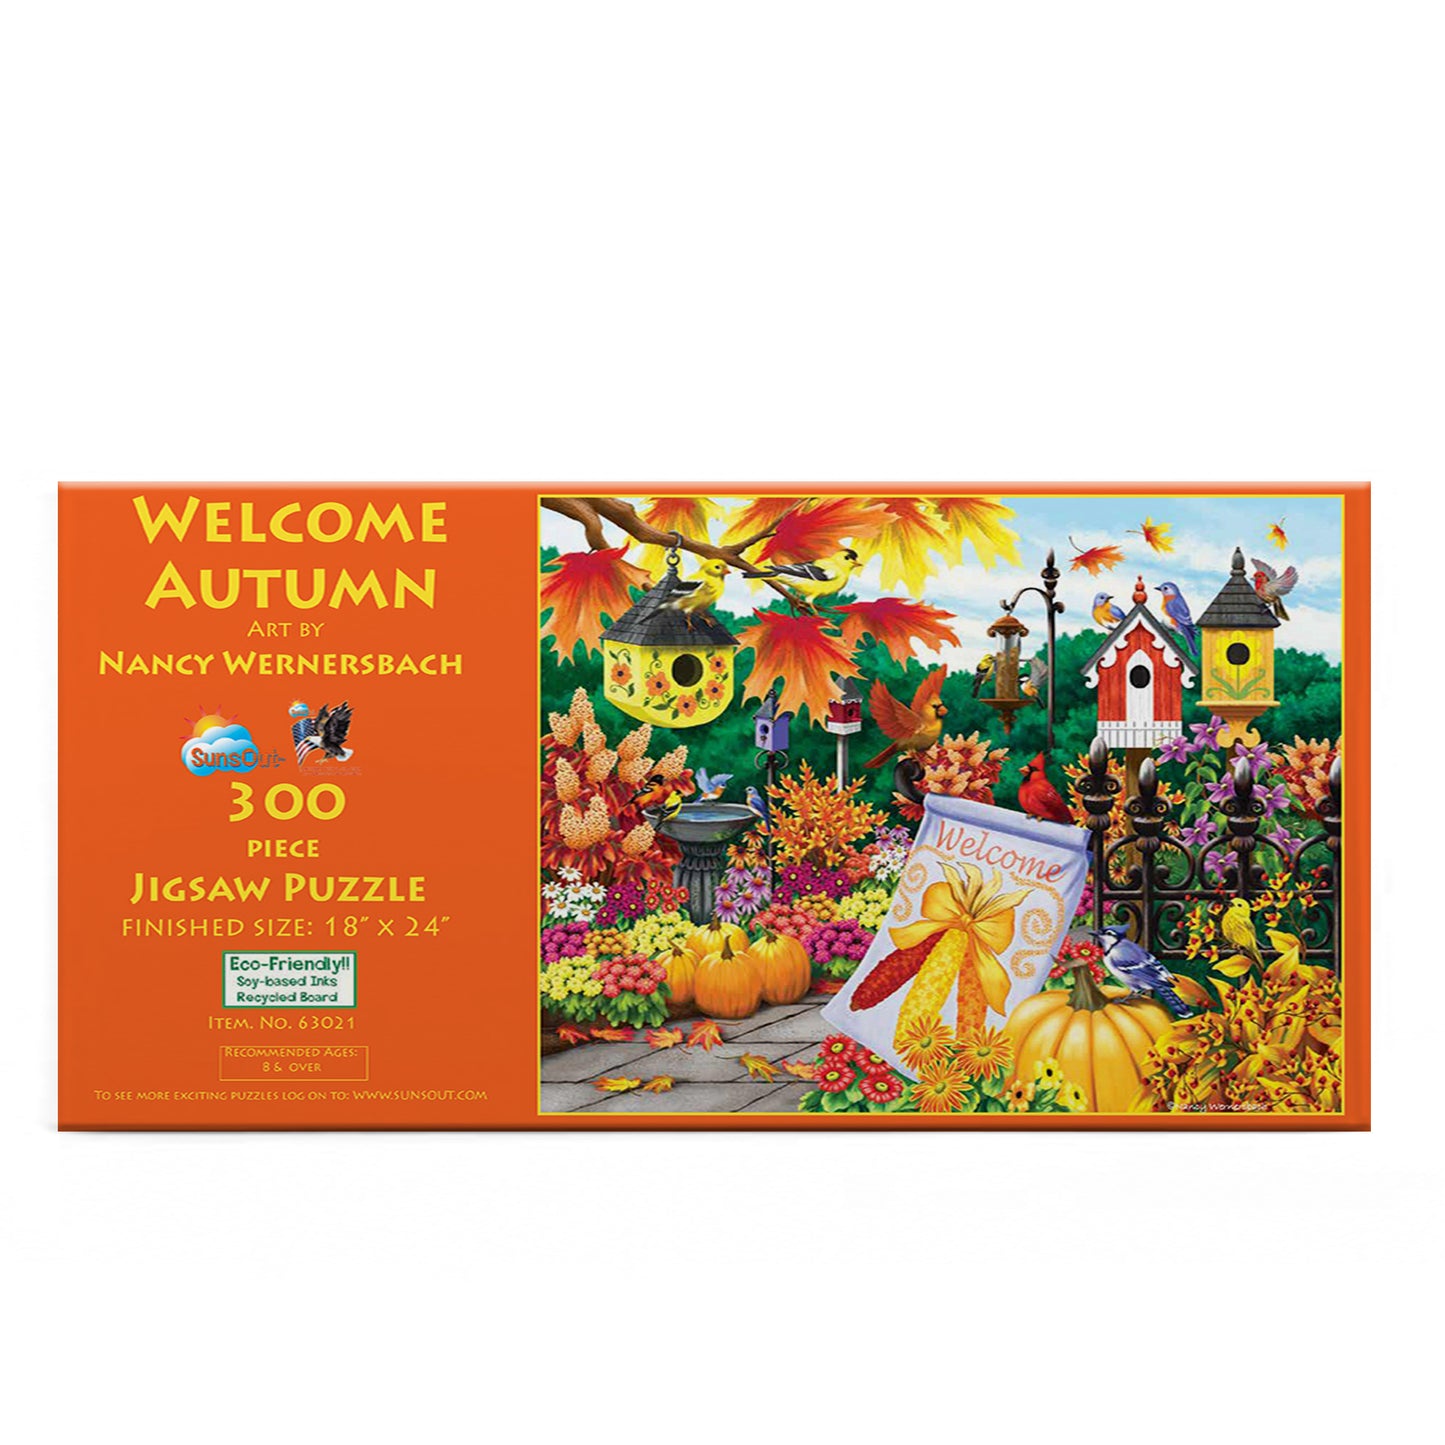 Welcome Autumn - 300 Piece Jigsaw Puzzle